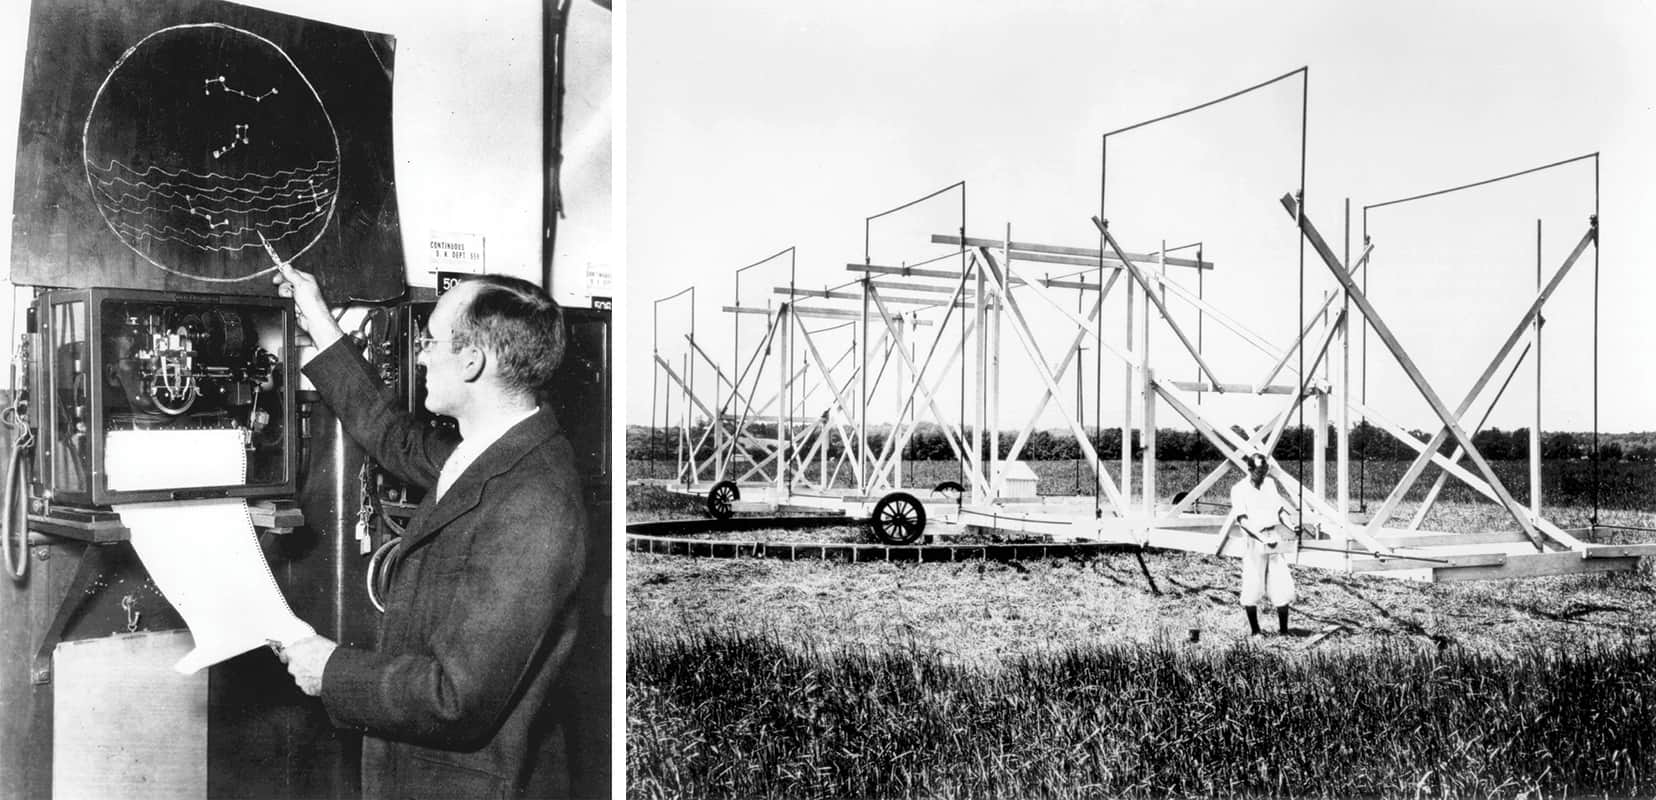 Two black and white photos: a man in an office and a large metal structure on wheels